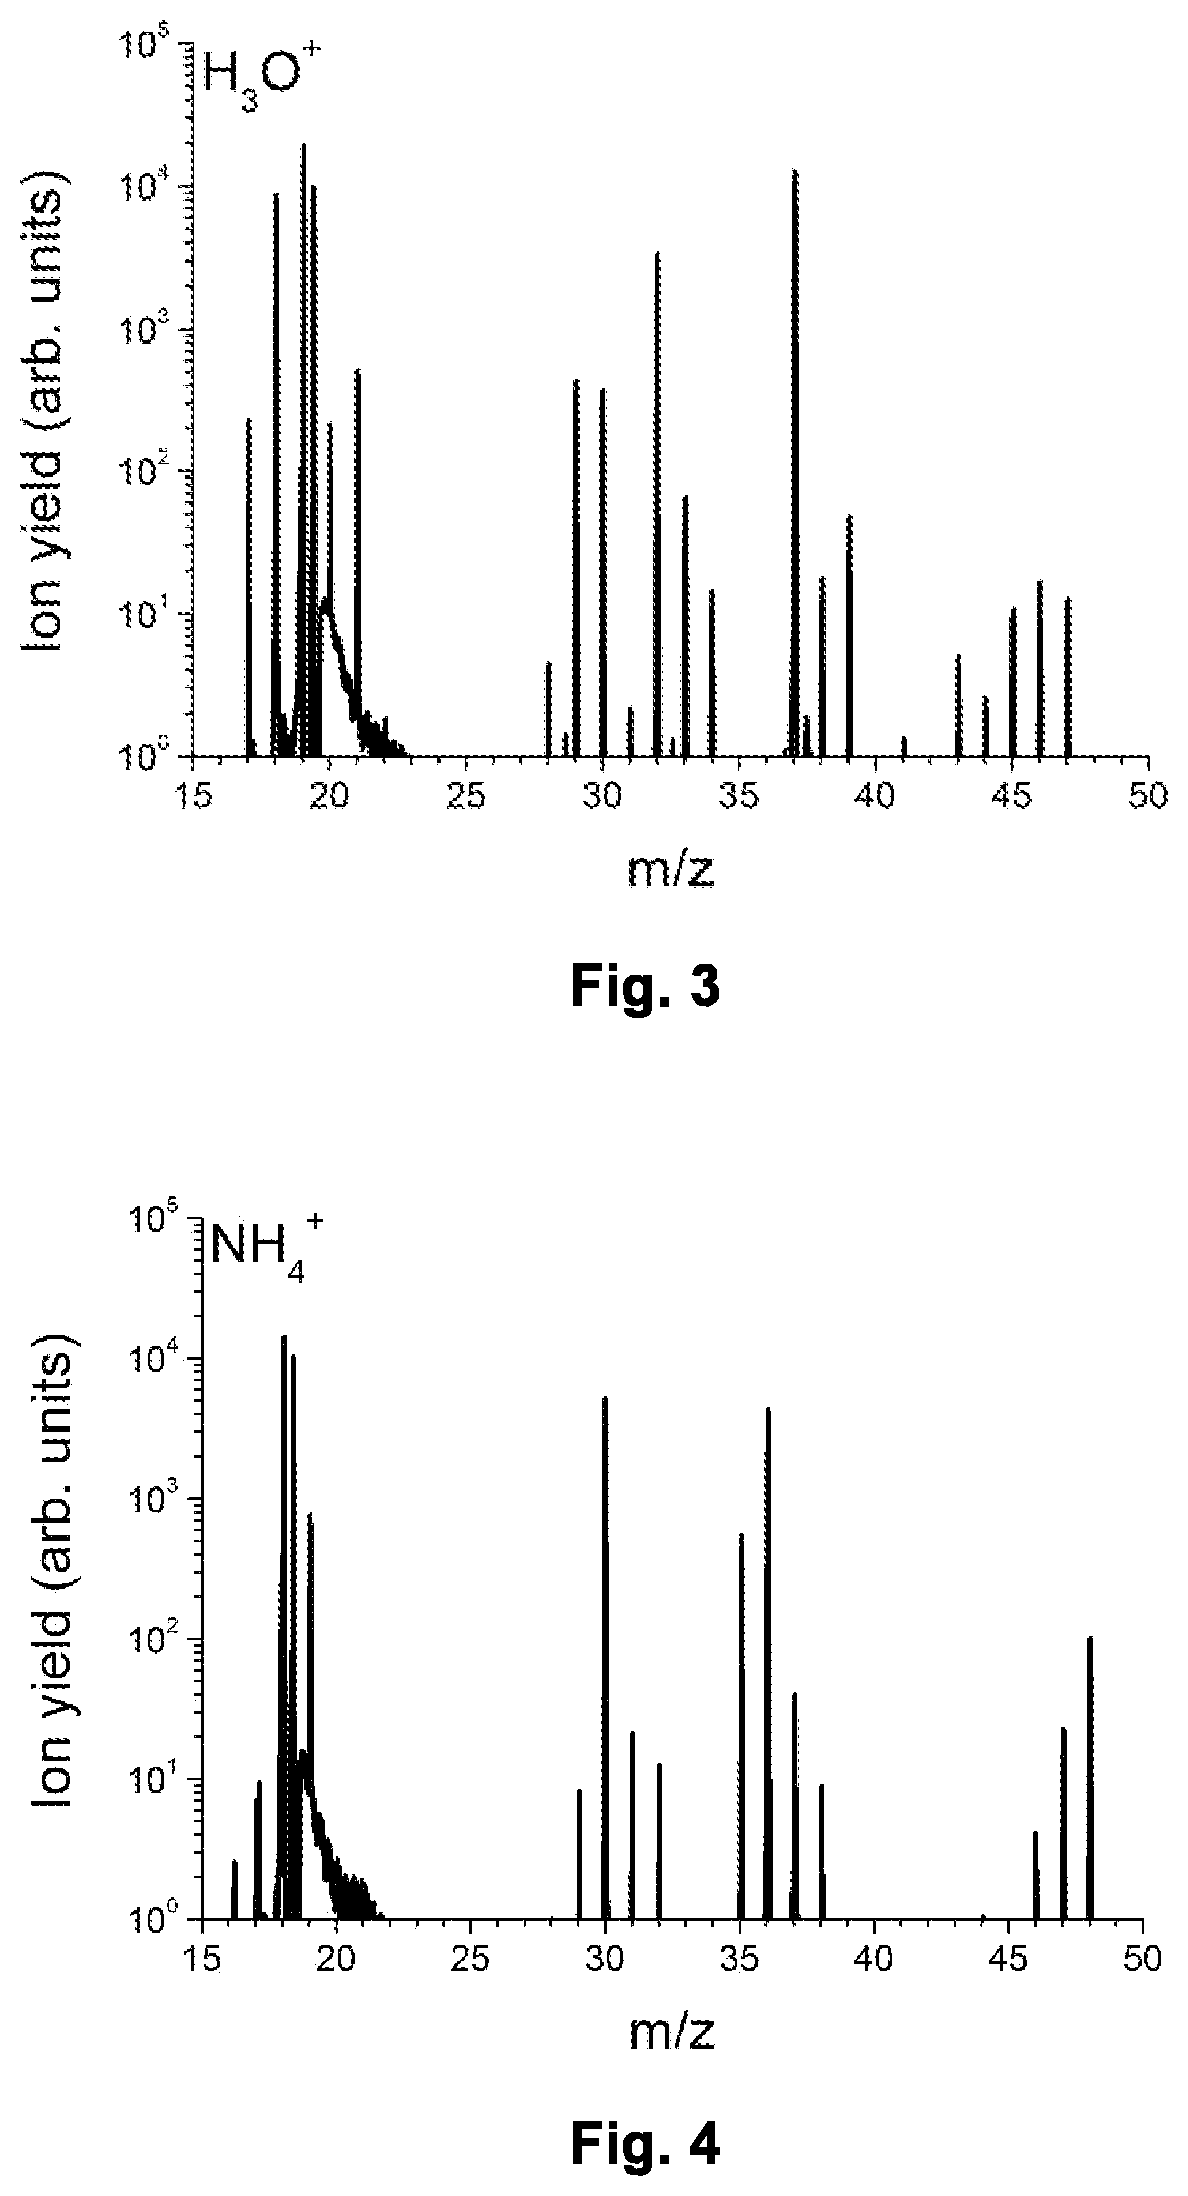 Method for producing gaseous ammonium for ion-molecule-reaction mass spectrometry